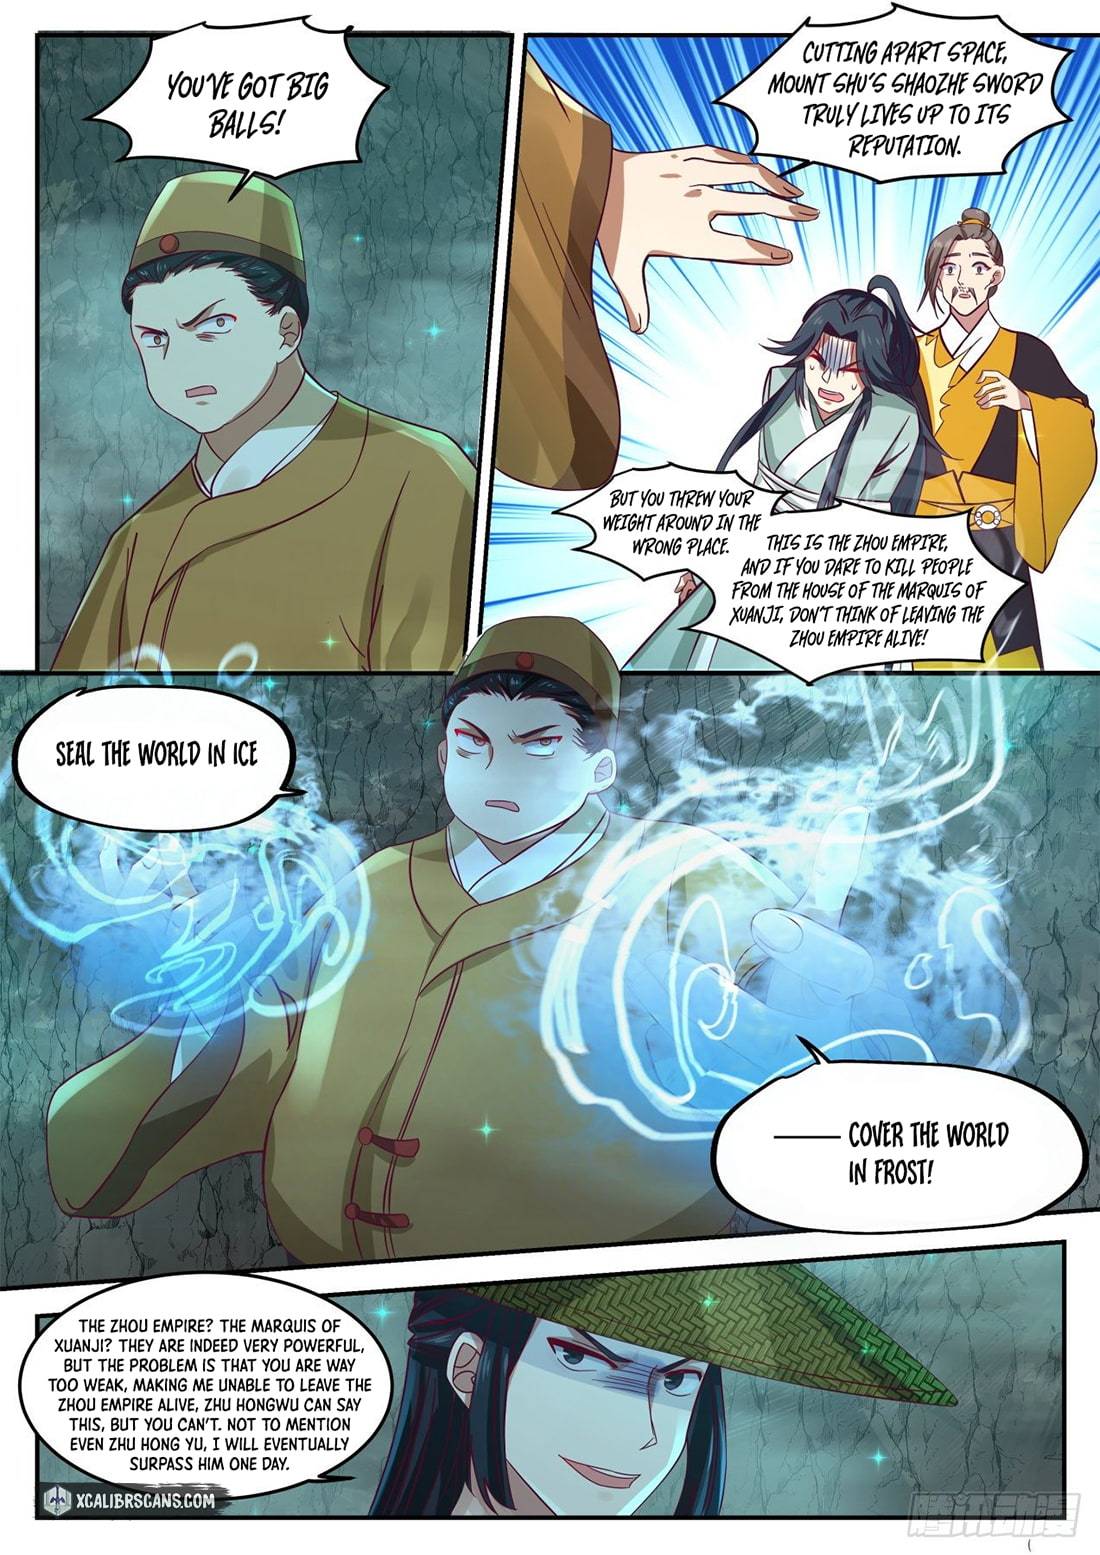 History's Number 1 Founder chapter 34 page 9